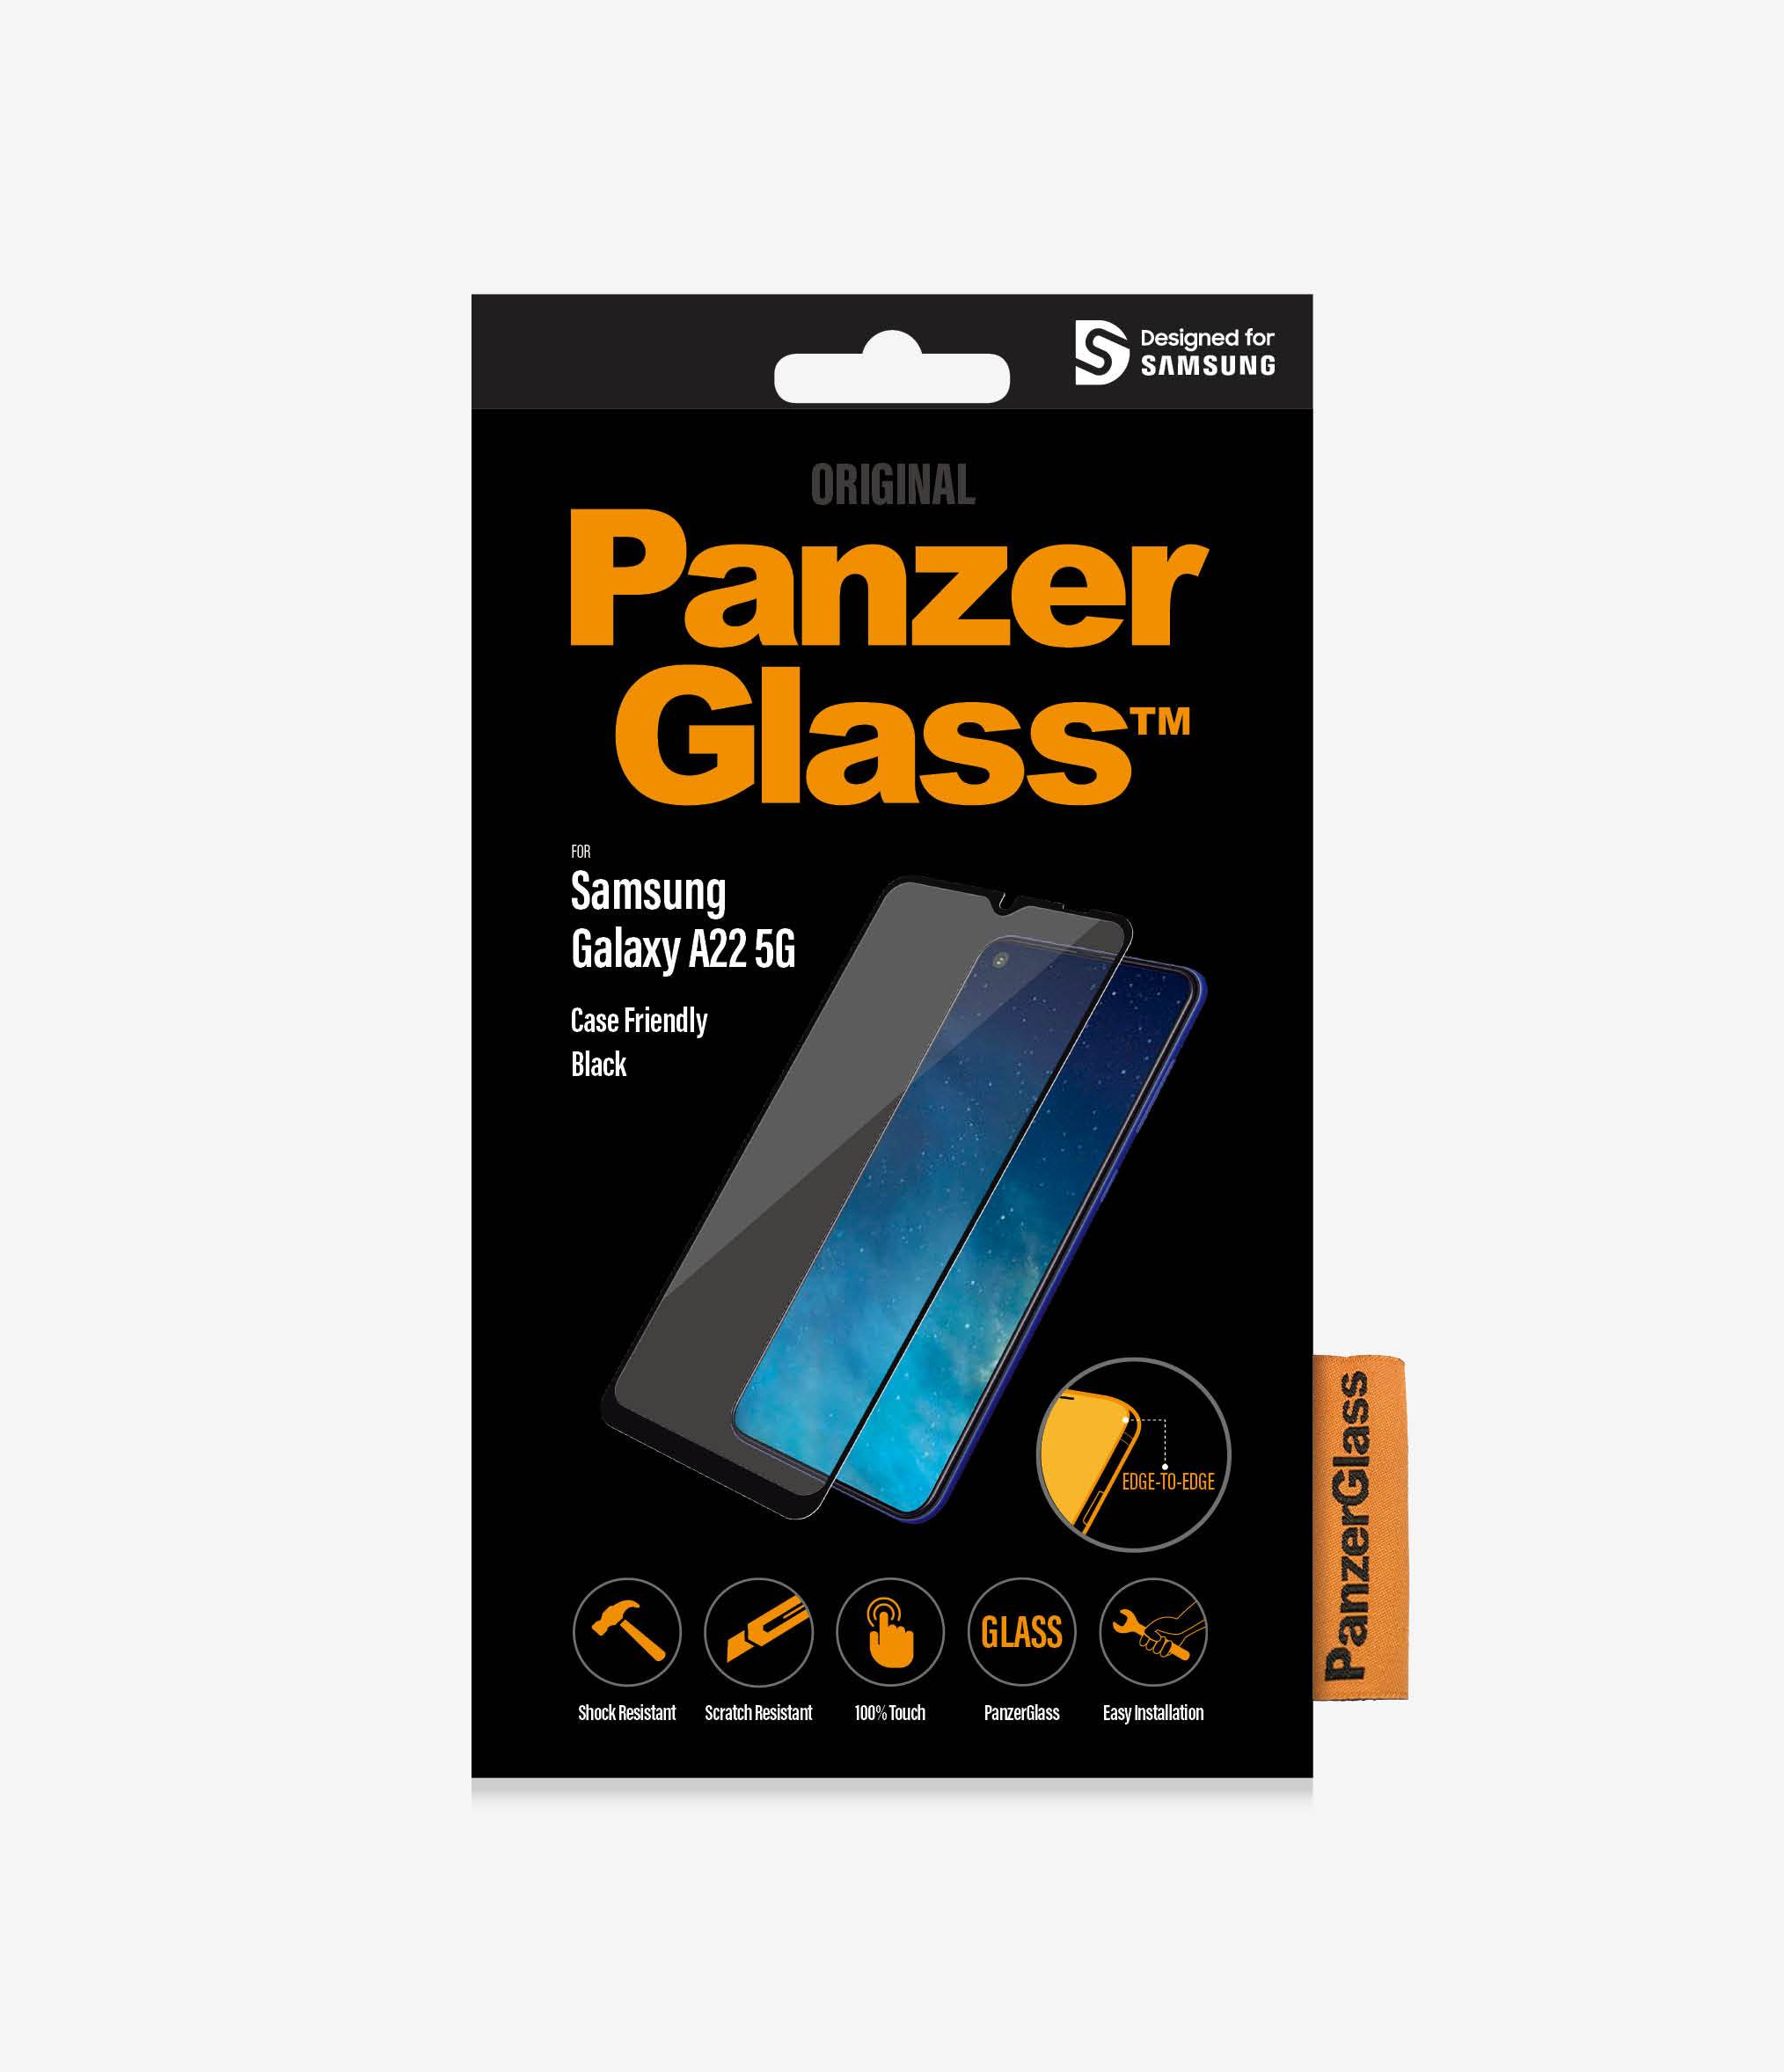 PanzerGlass™ Samsung Galaxy A22 5G - Clear glass (7274) - Screen Protector - Full frame coverage, Rounded edges, Crystal clear, 100% touch